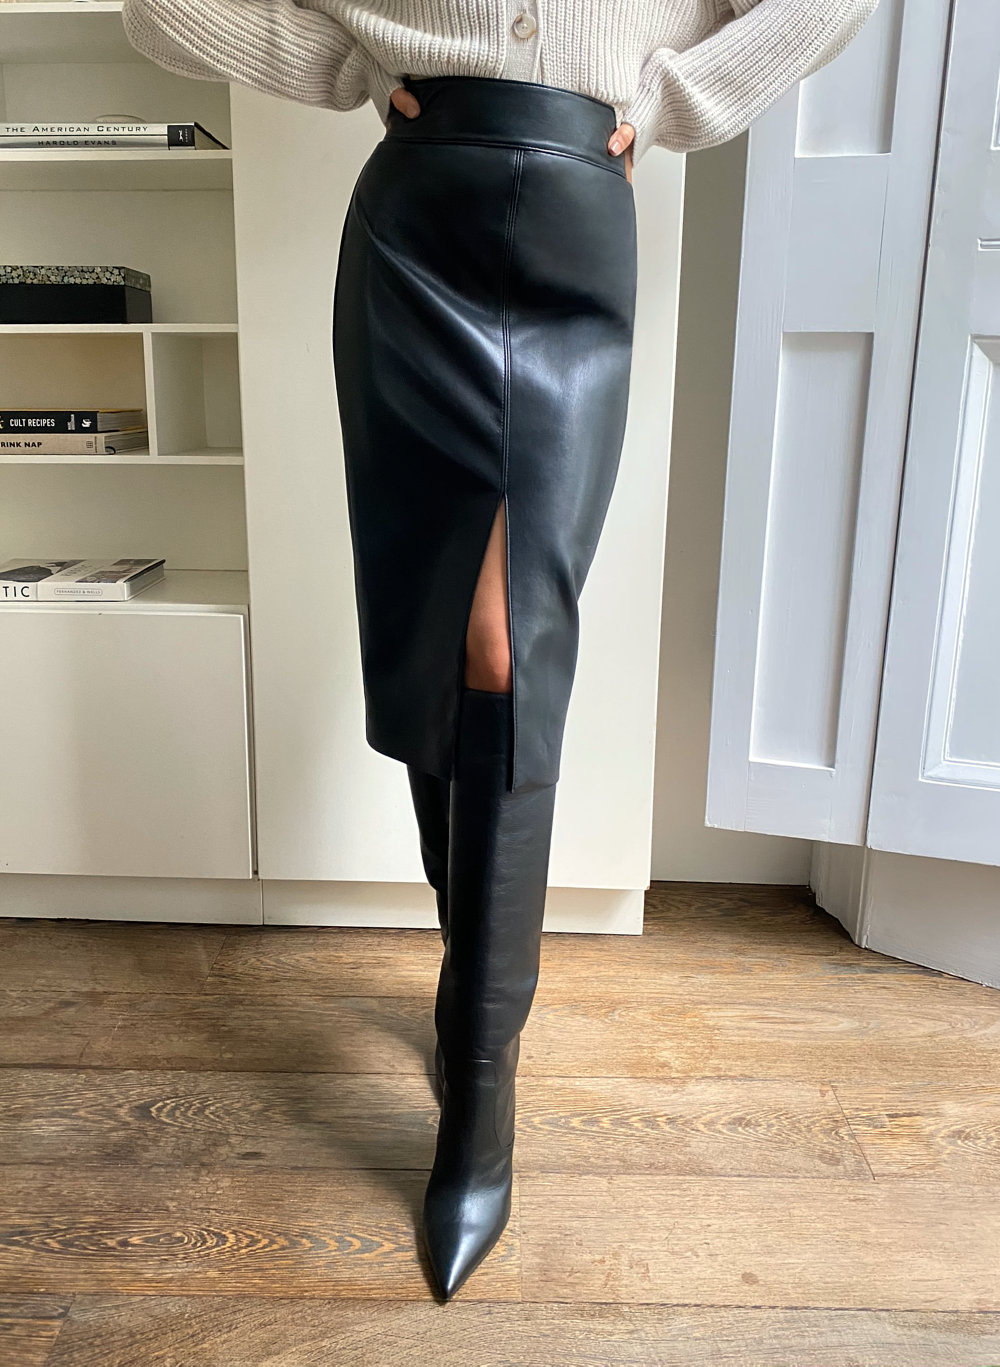 knee high boots and pencil skirt